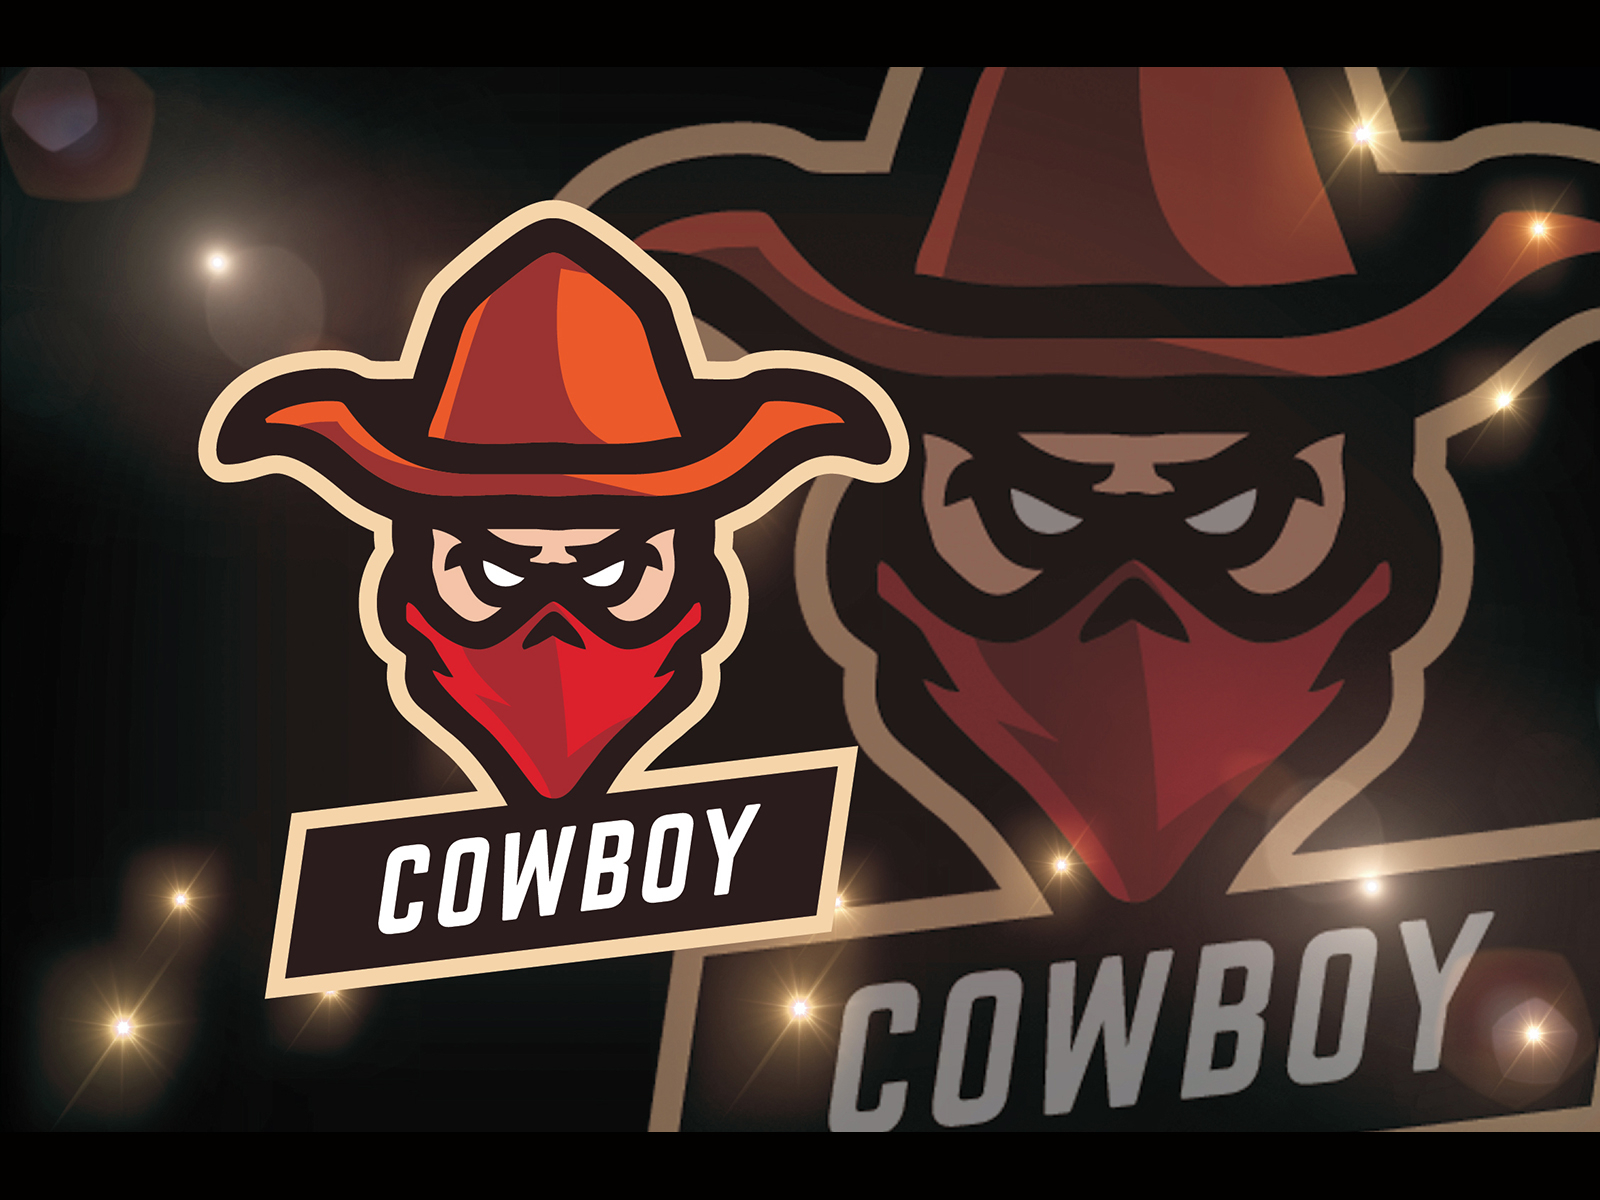 Download Free Cowboy Logo Esport By Remarena On Dribbble PSD Mockup Template